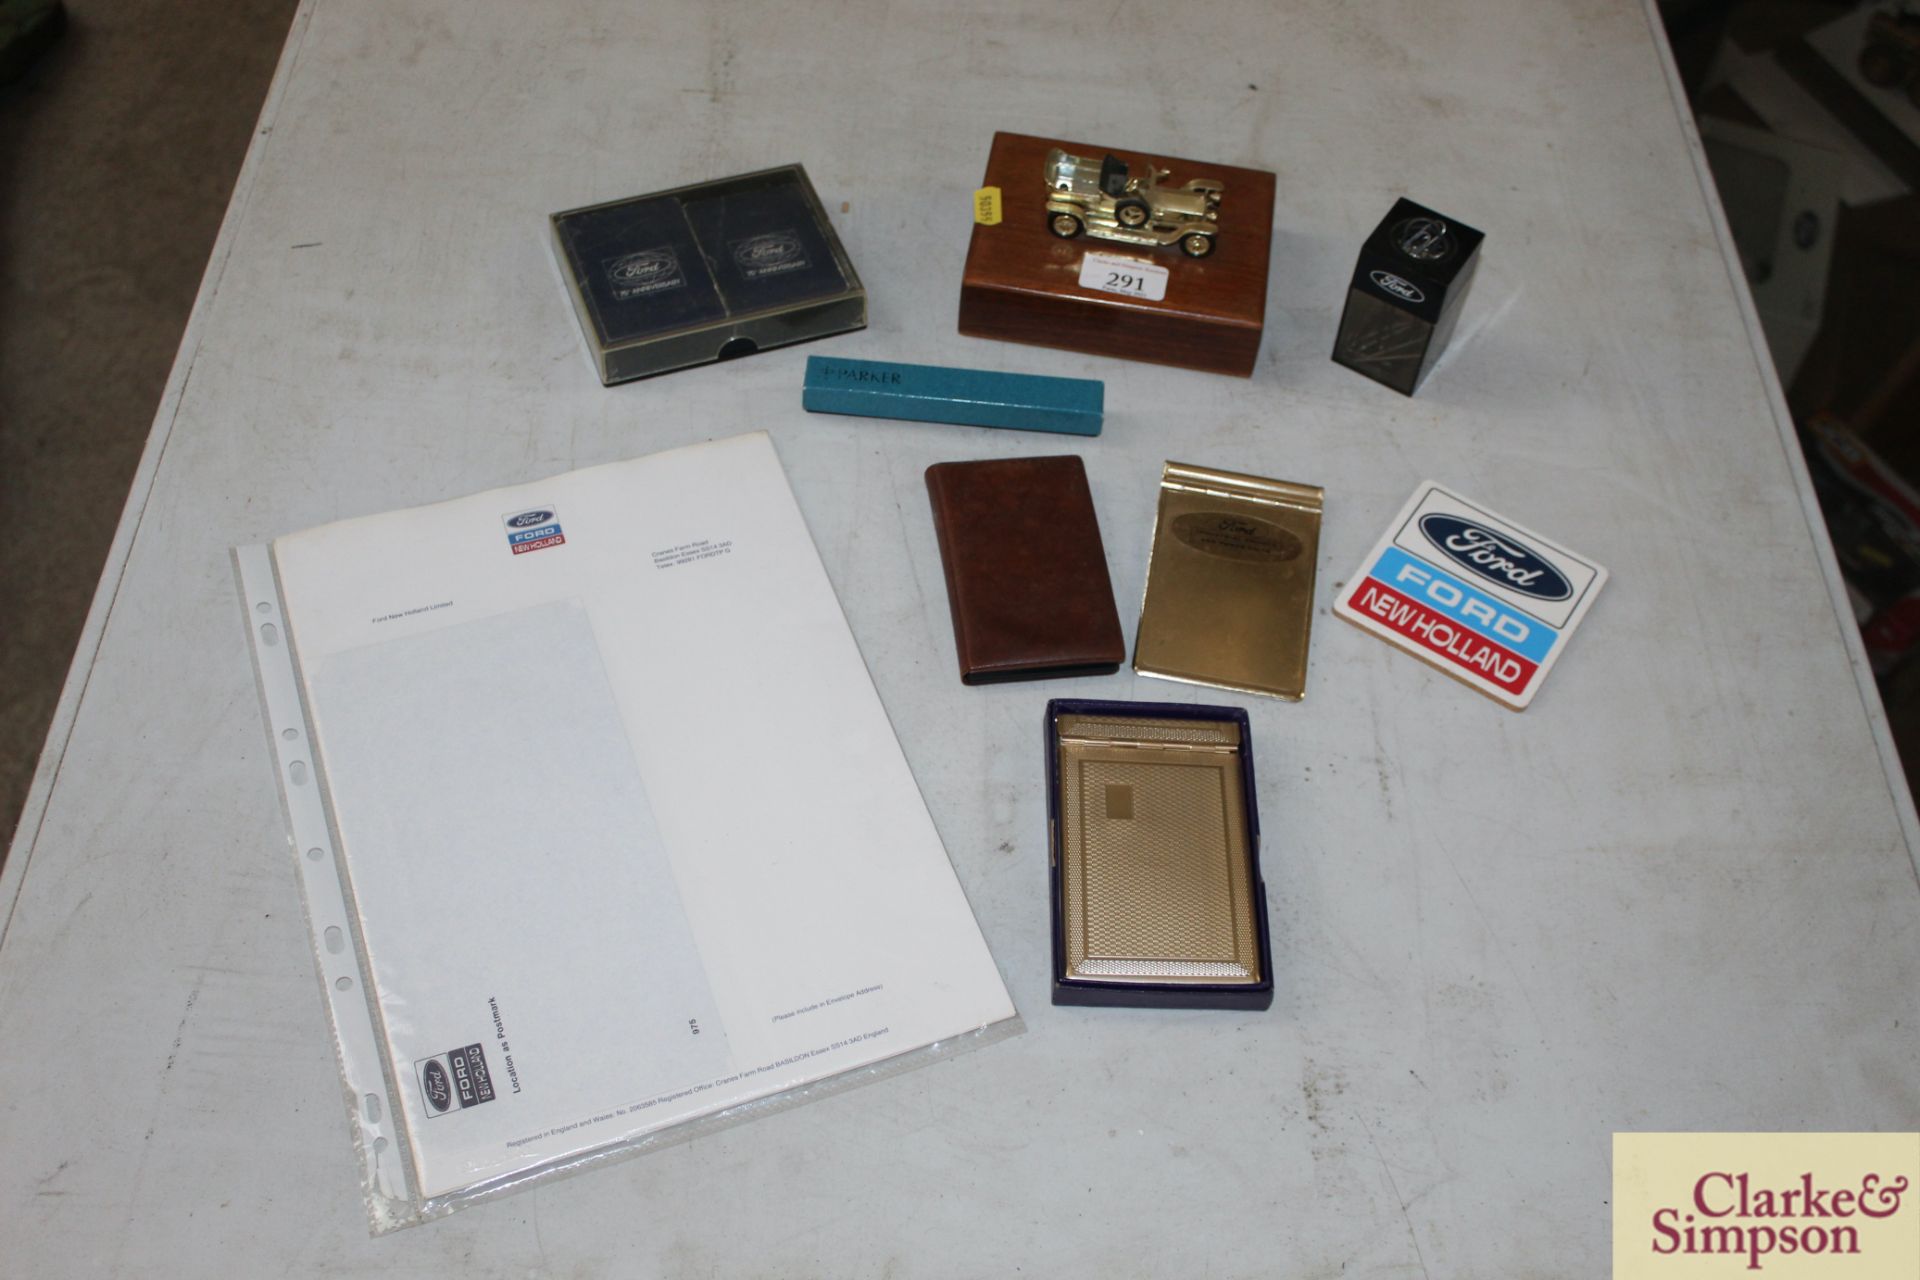 Various Ford memorabilia items to include business